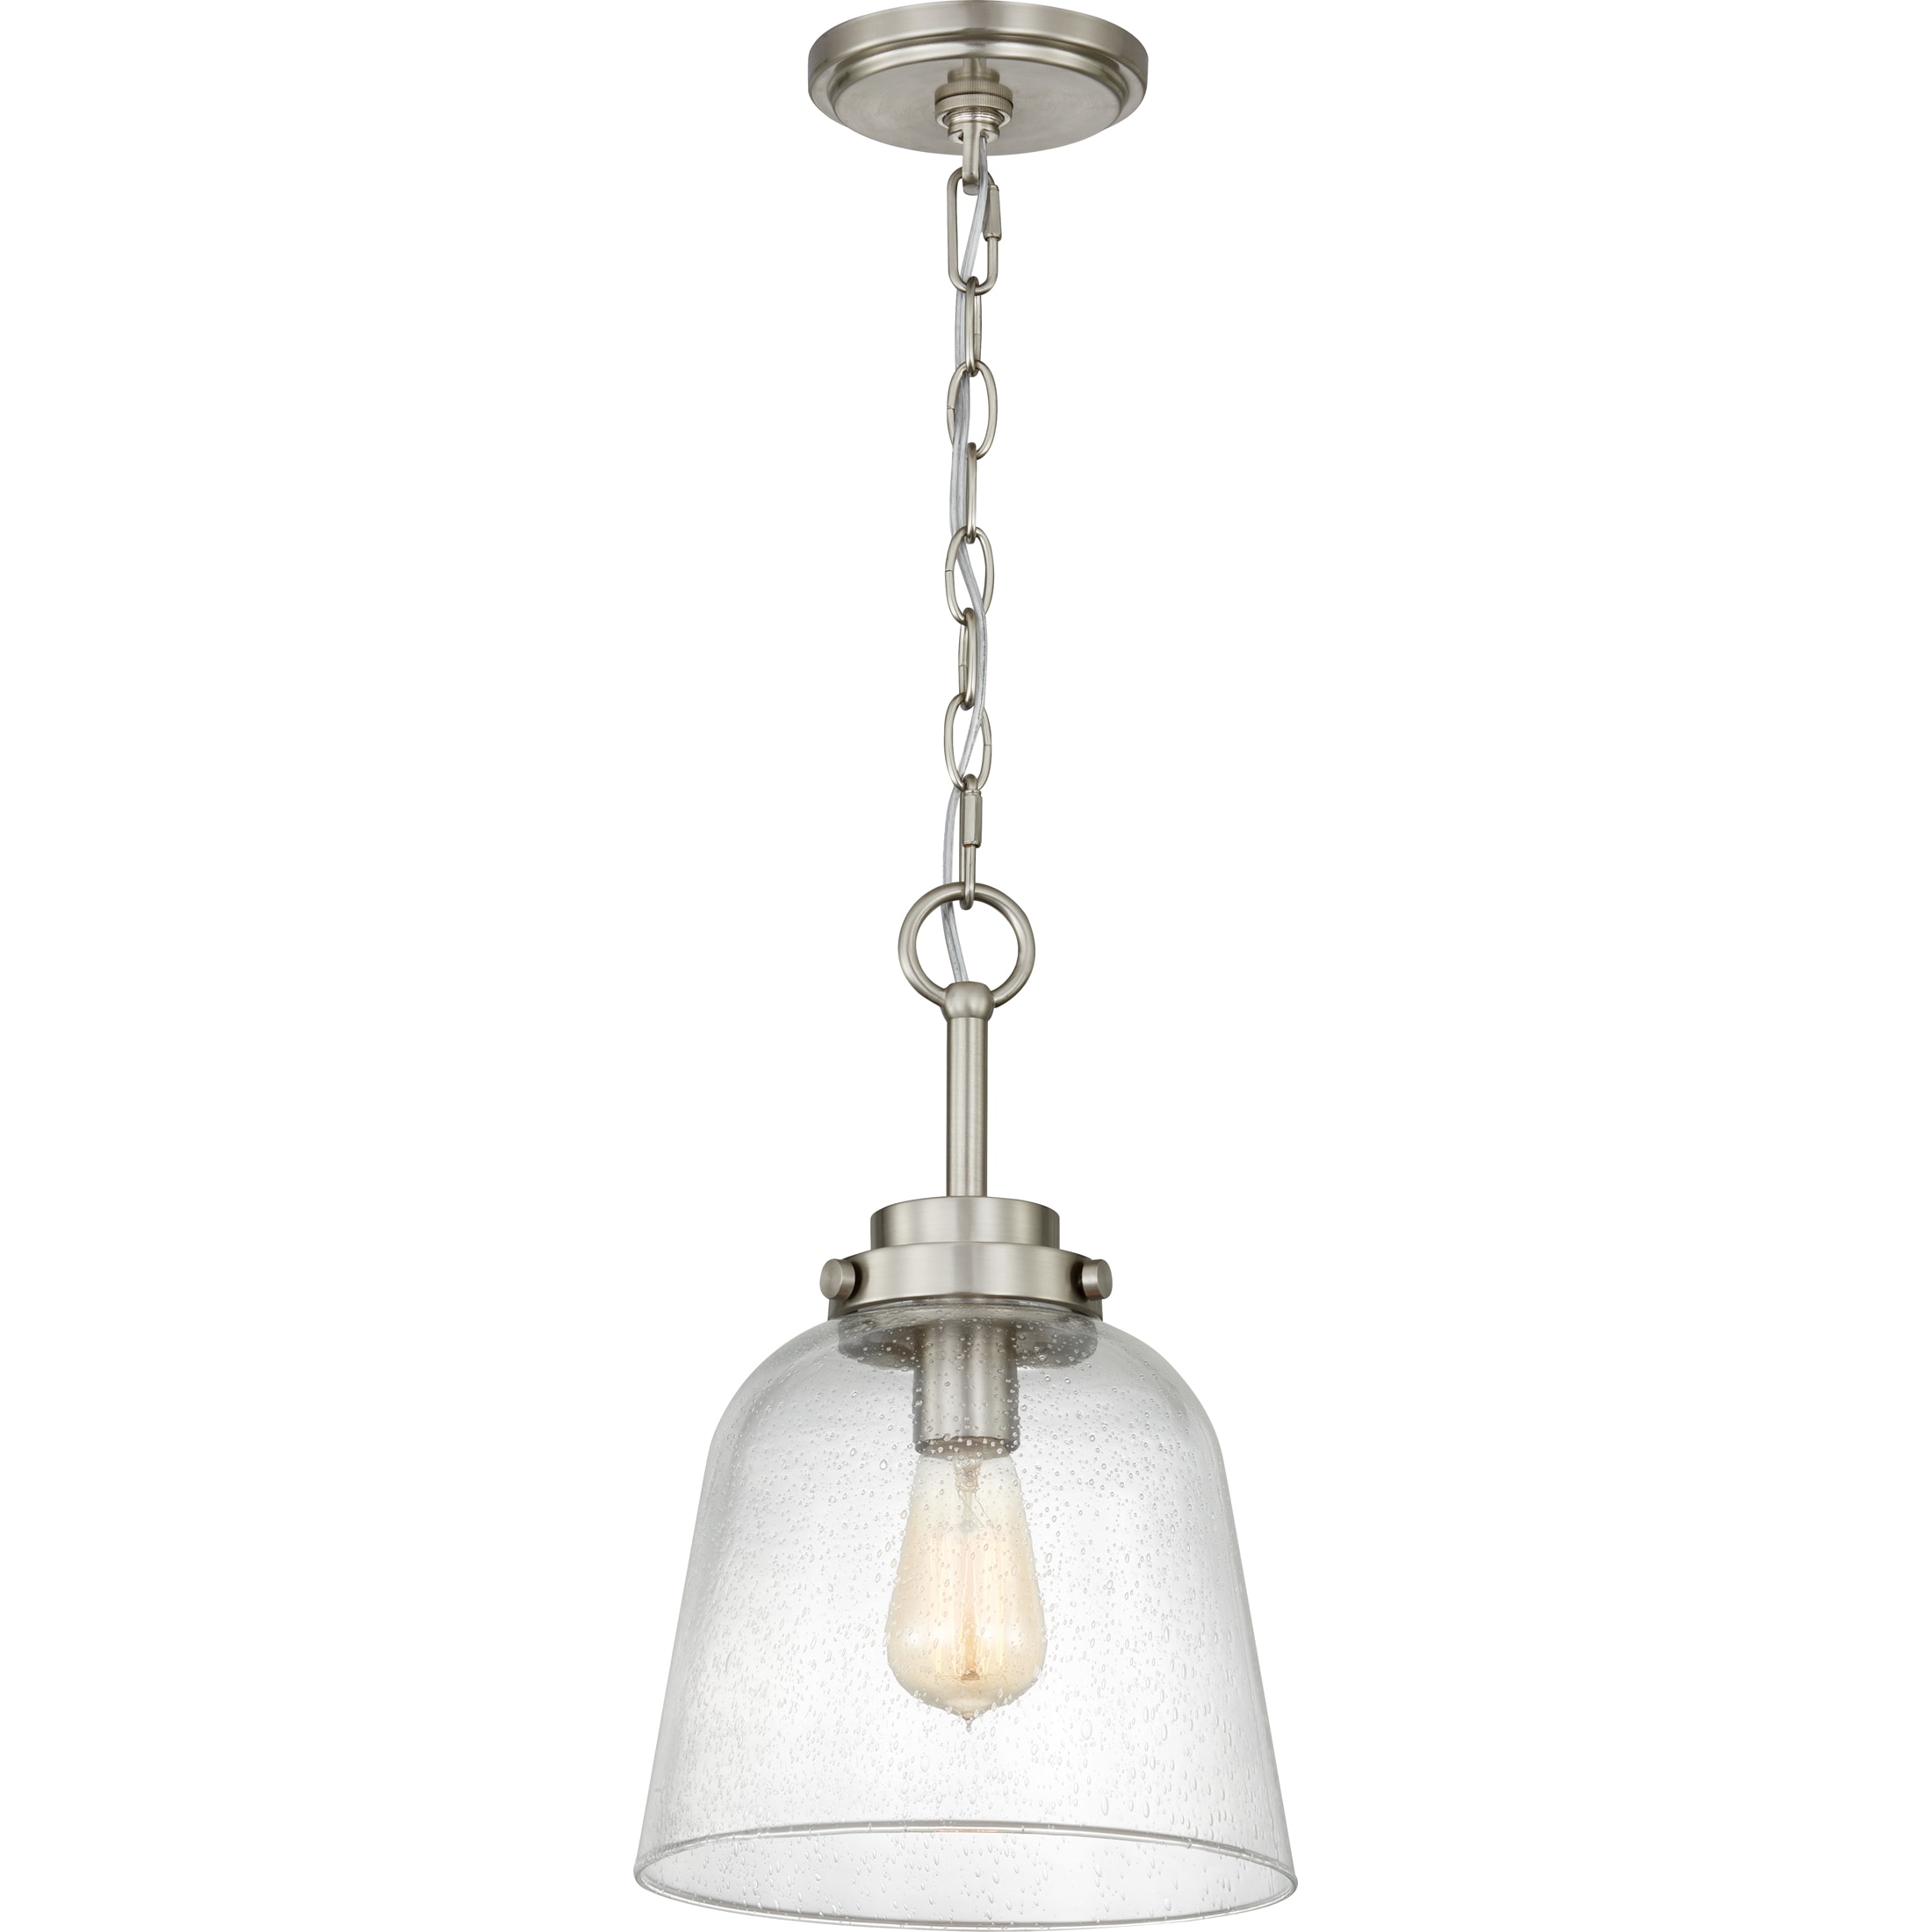 Quoizel Seaton Brushed Nickel Transitional Seeded Glass Cone Mini ...